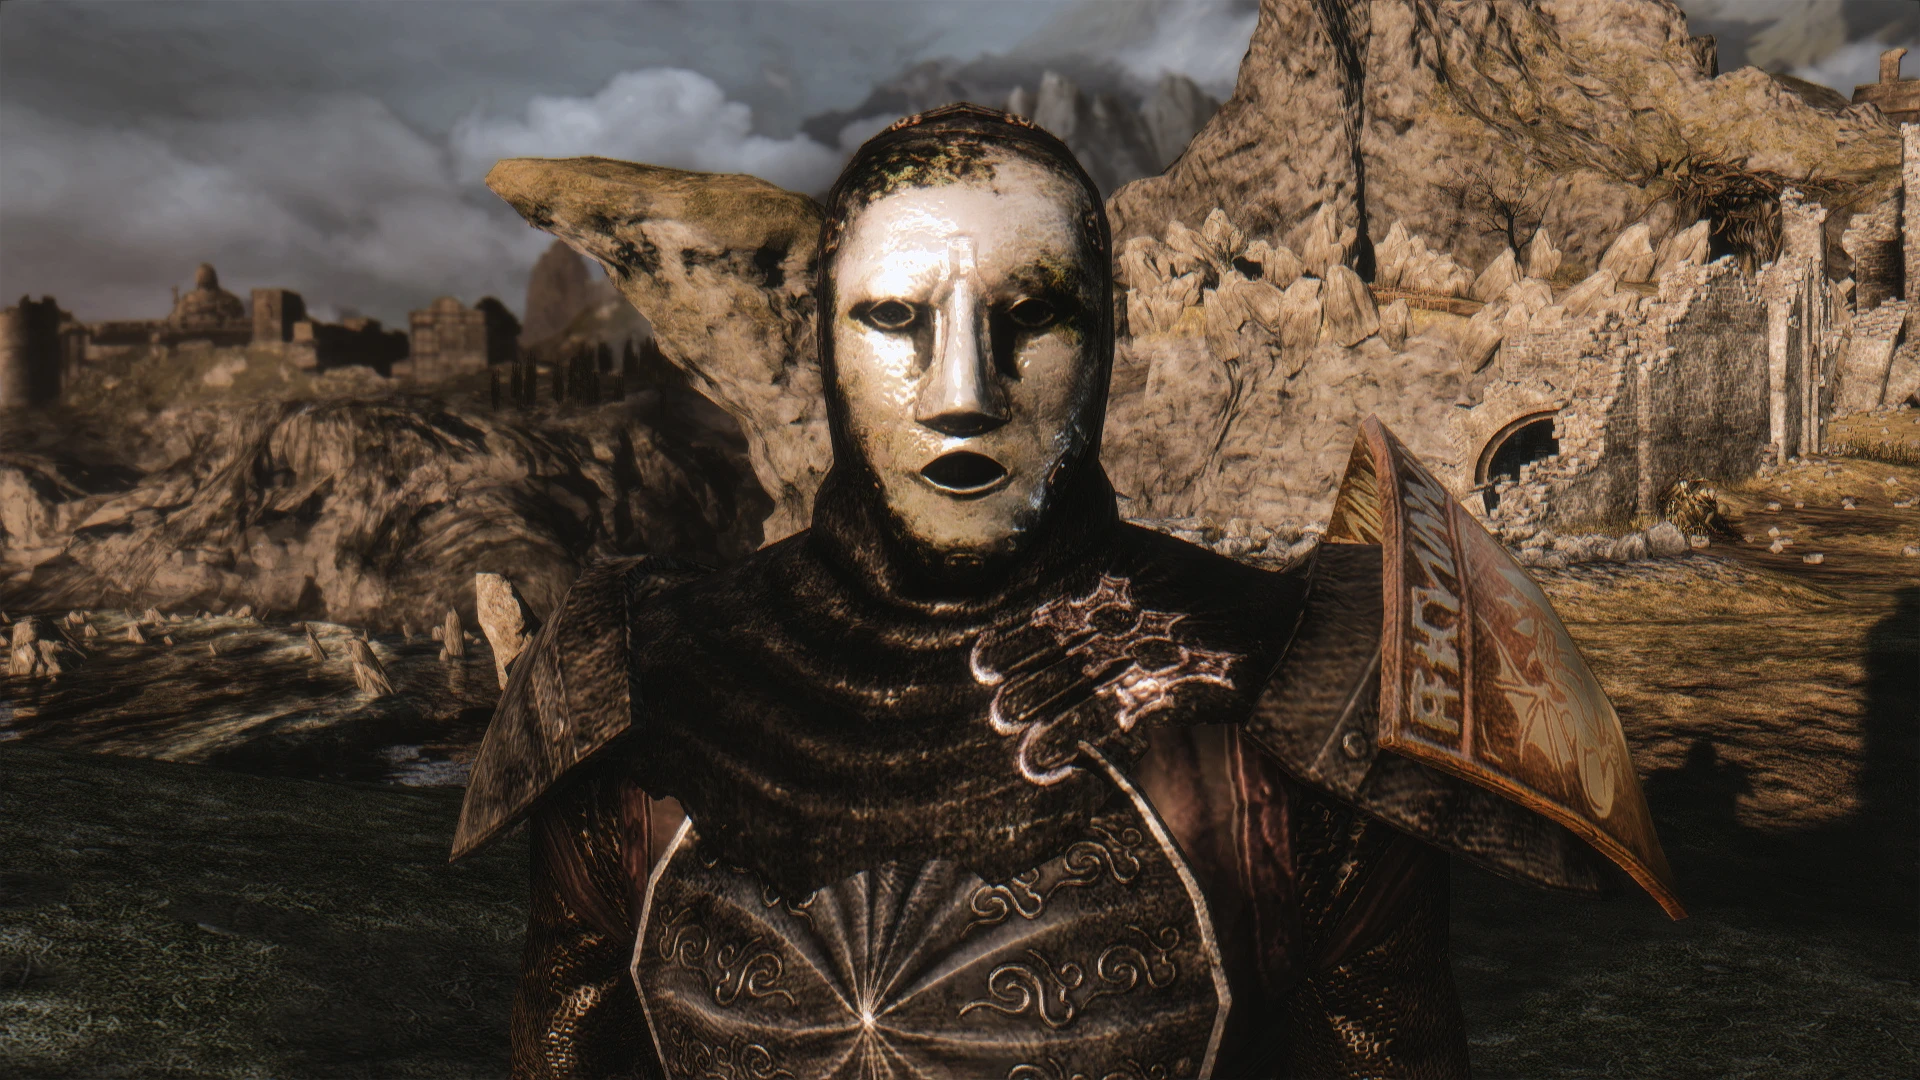 Was S Silver Mannequin Mask At Dark Souls 2 Nexus Mods Of Ds2 Thief Mask. 